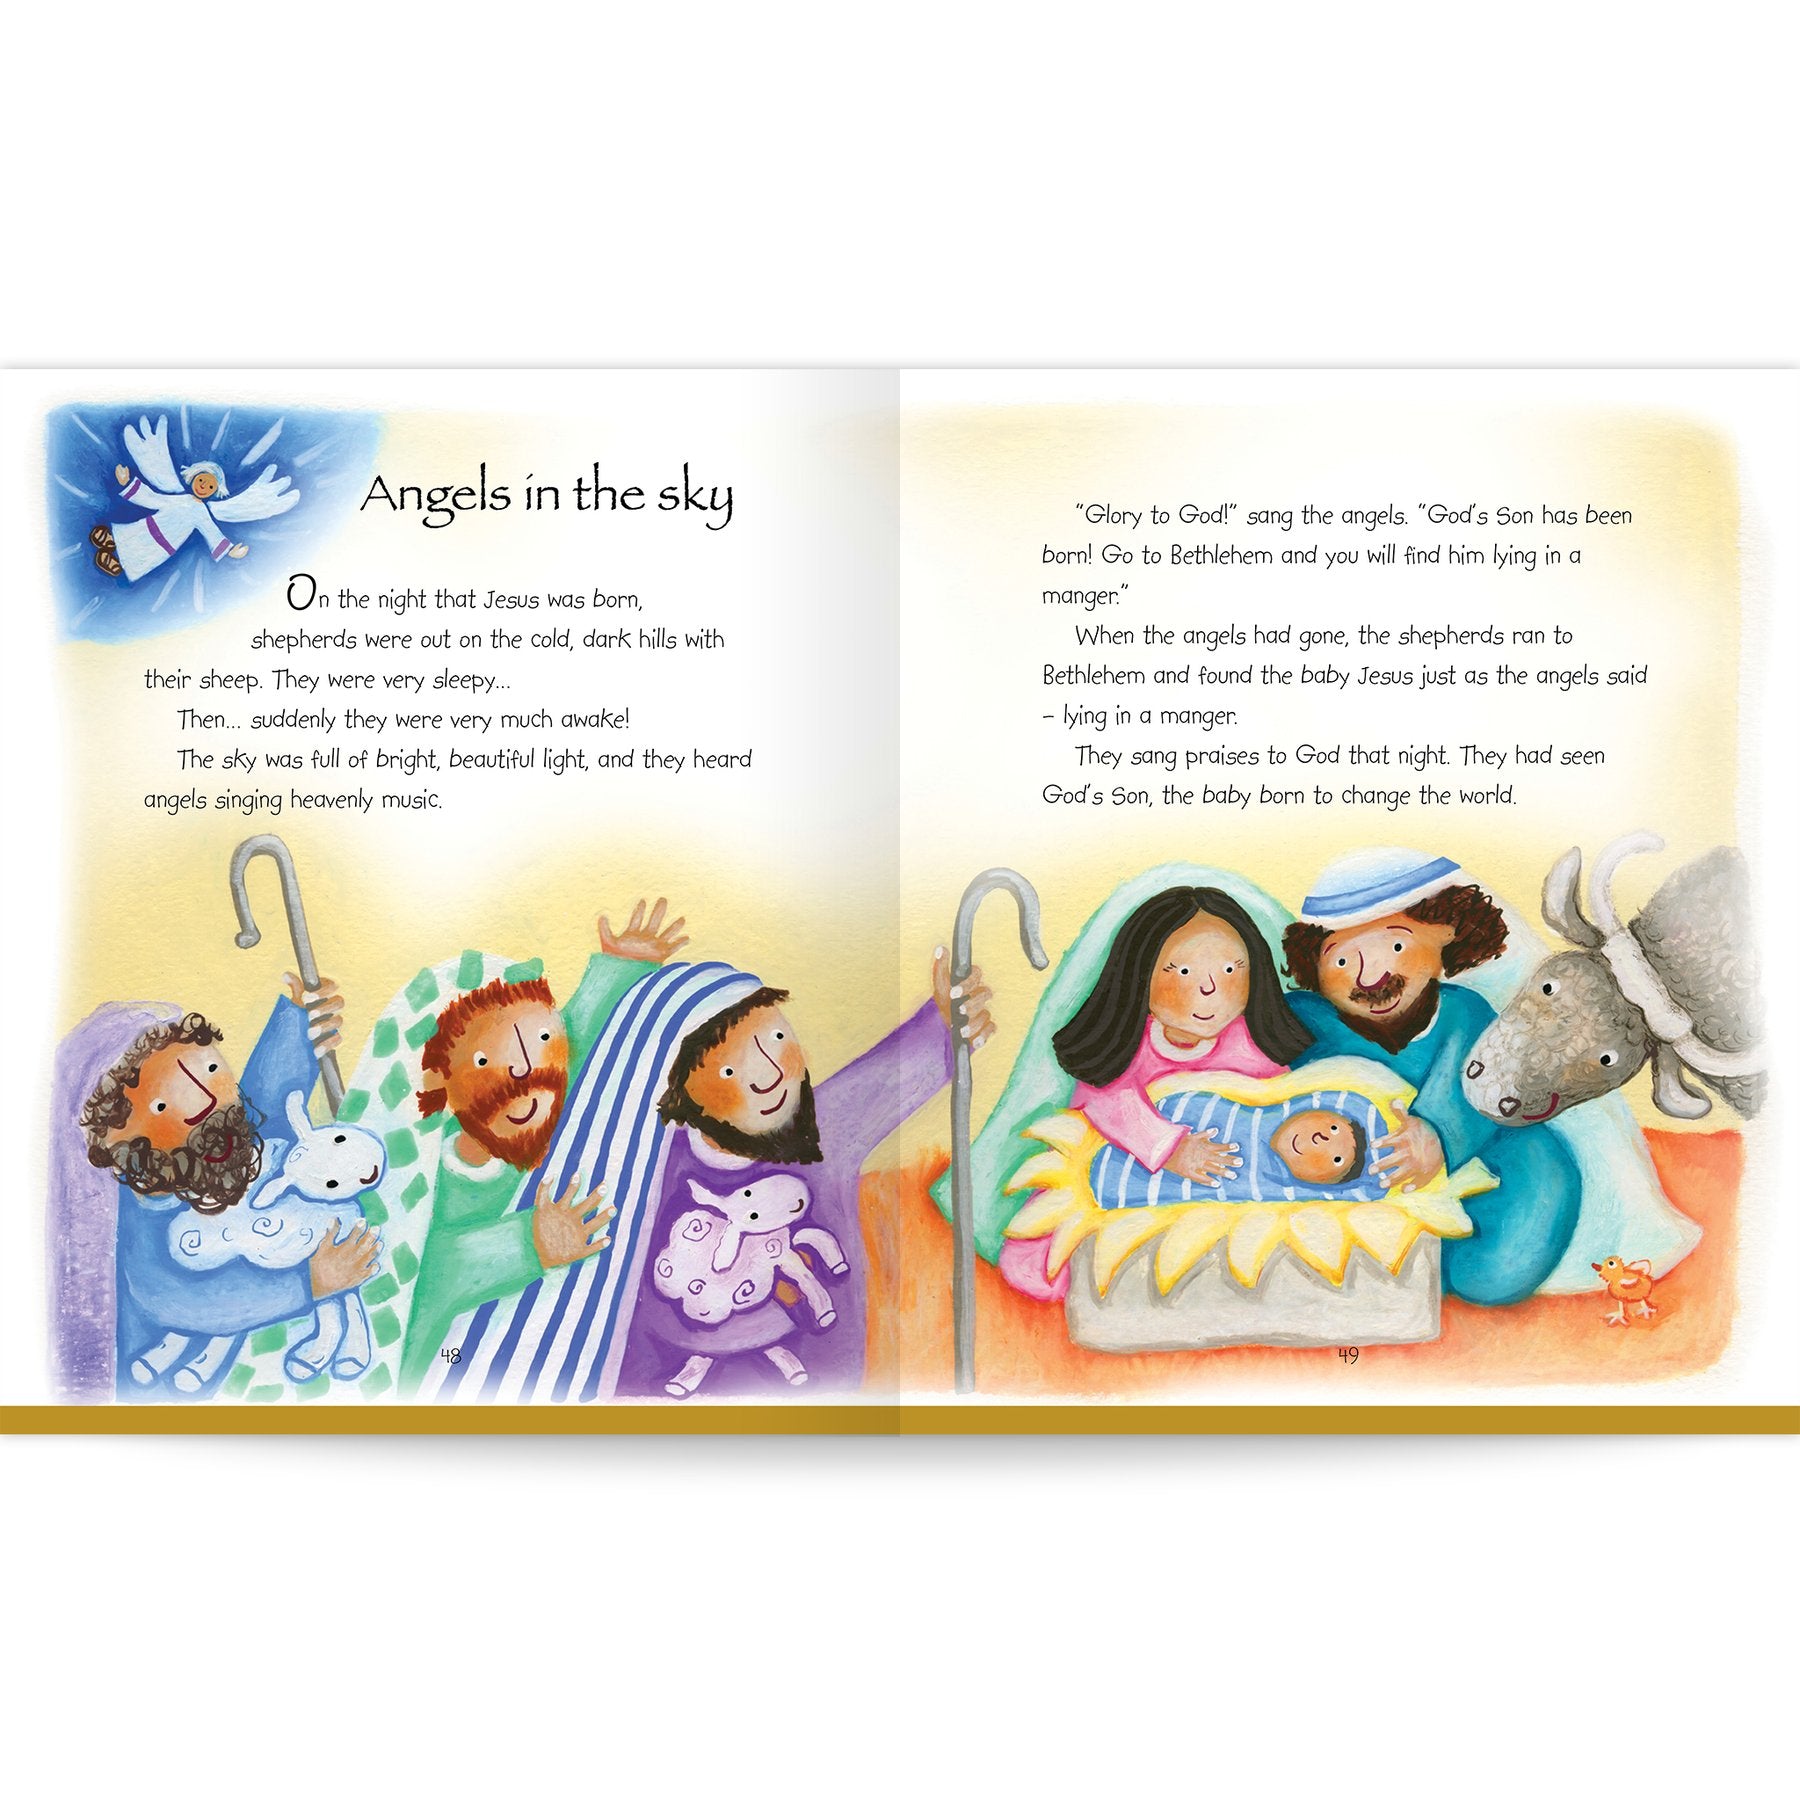 My Catholic Picture Bible Stories, Ages 4-7